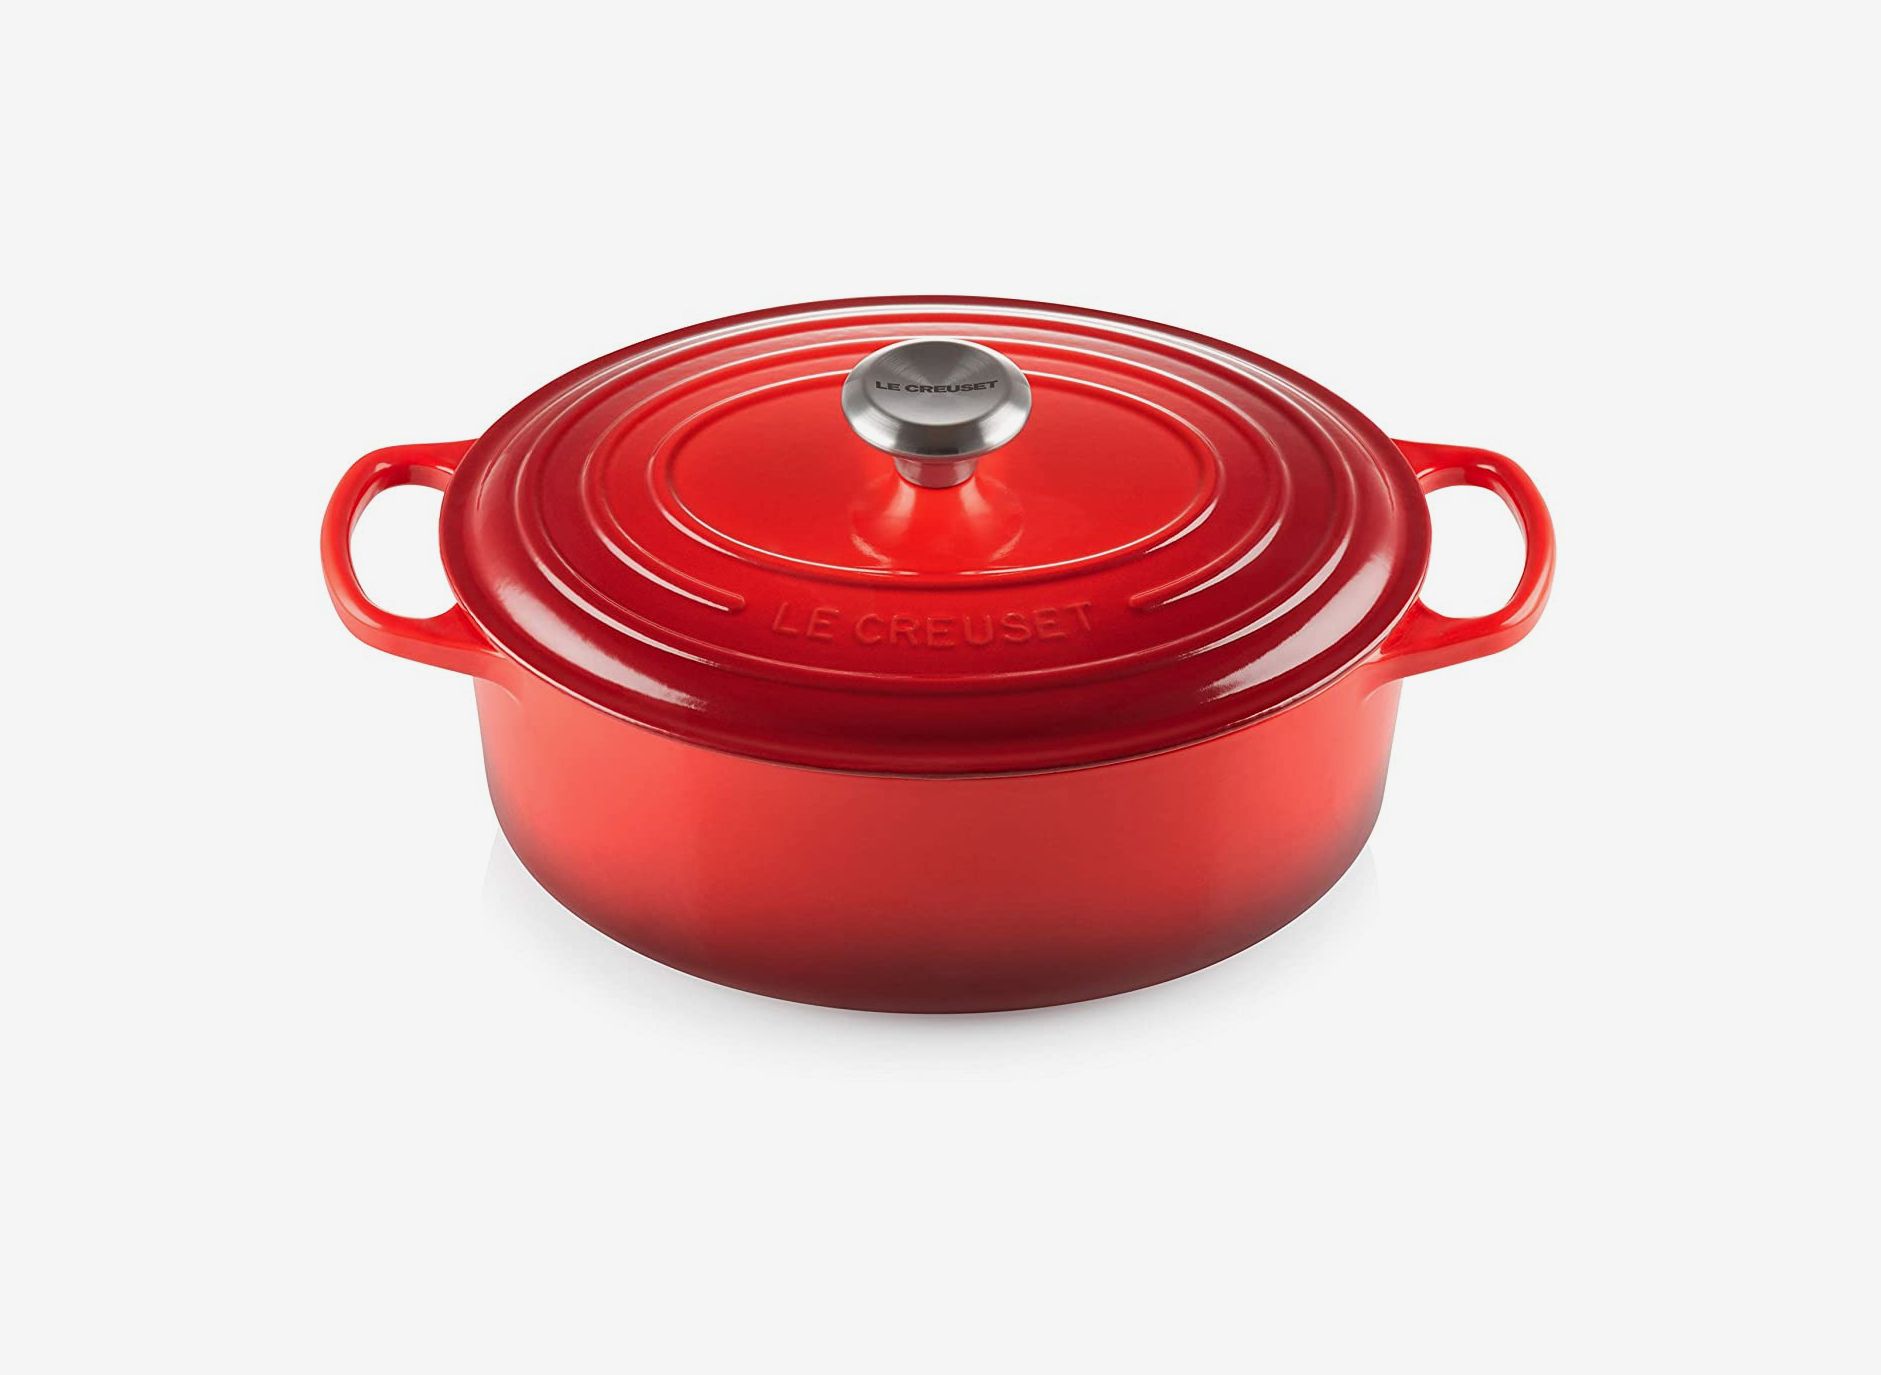 Best Cast-Iron Pots According to the Strategist | The Strategist